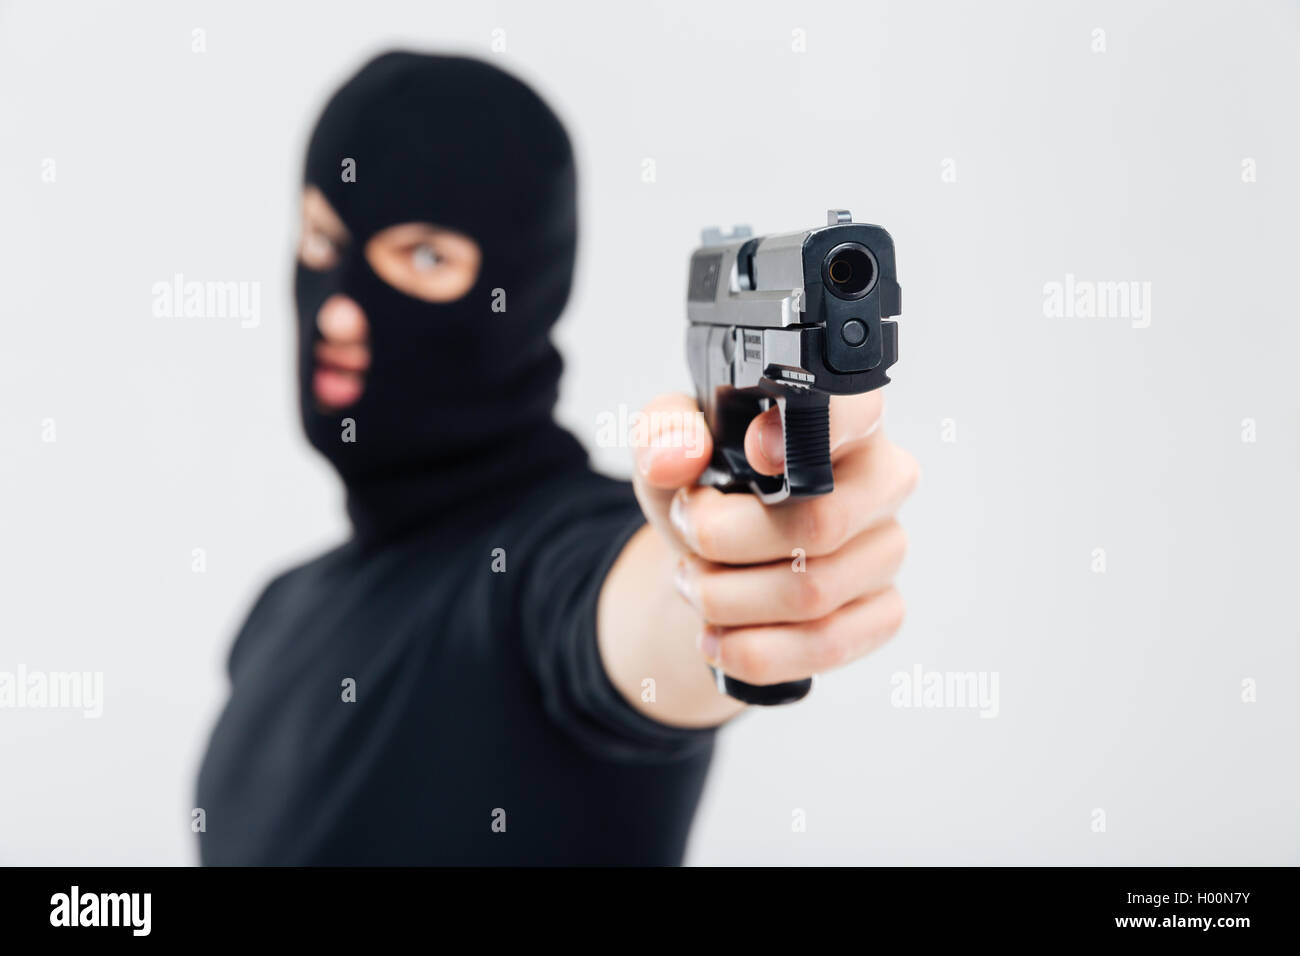 Man robber in balaclava pointing with gun Stock Photo